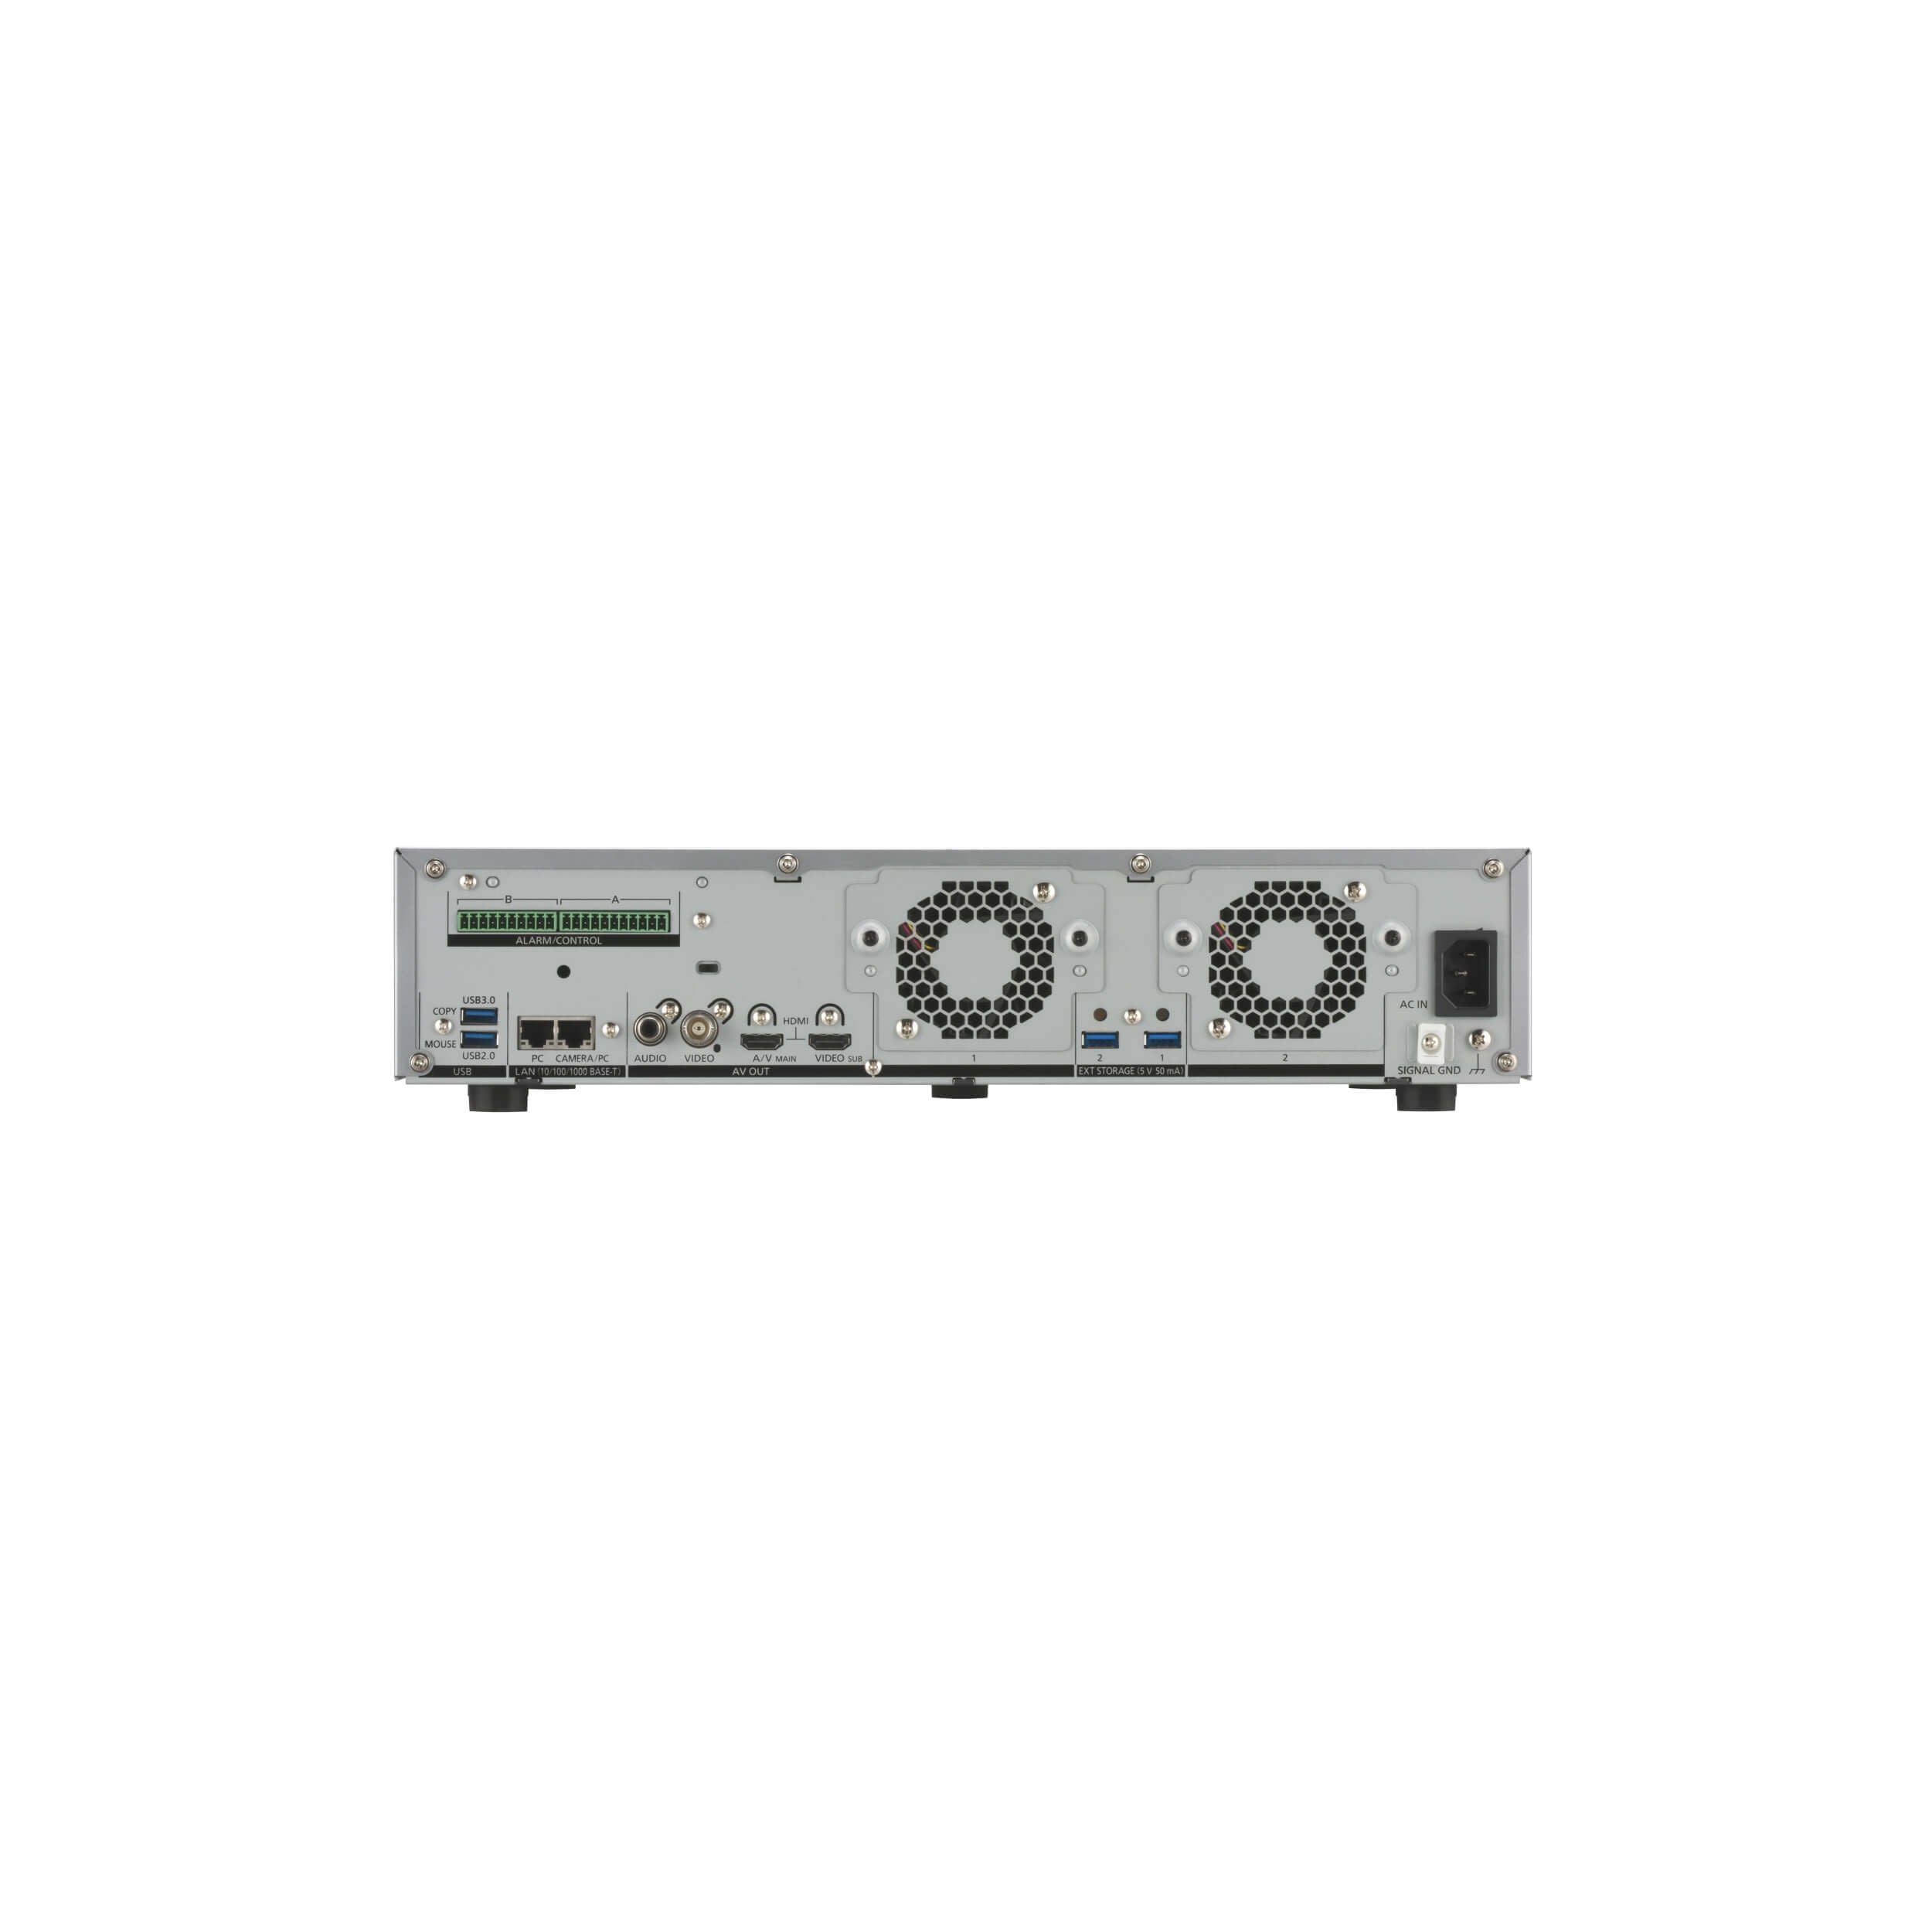 i-PRO WJ-NX300 Series H.265/H.264 Embedded Network Video Recorders